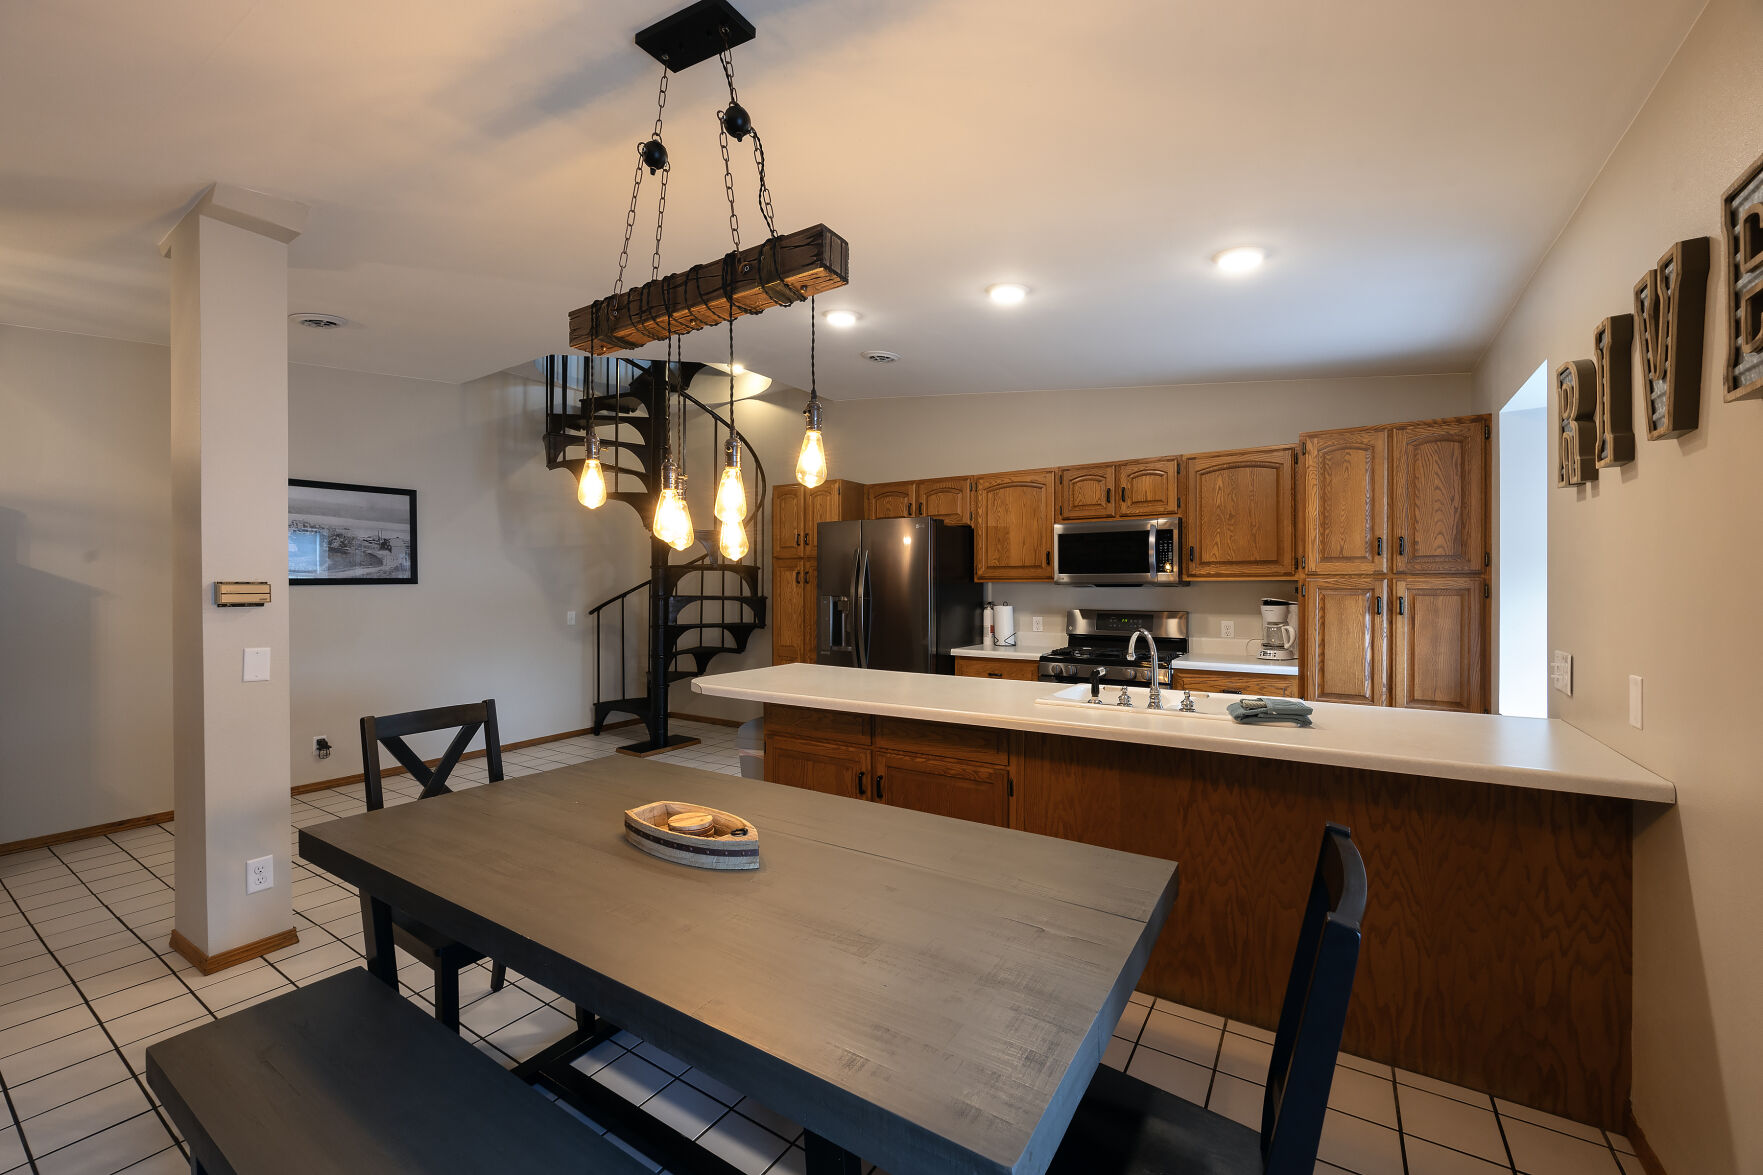 The kitchen and dining area in one of the suites at River Rock Inn in Bellevue, Iowa.    PHOTO CREDIT: Gassman